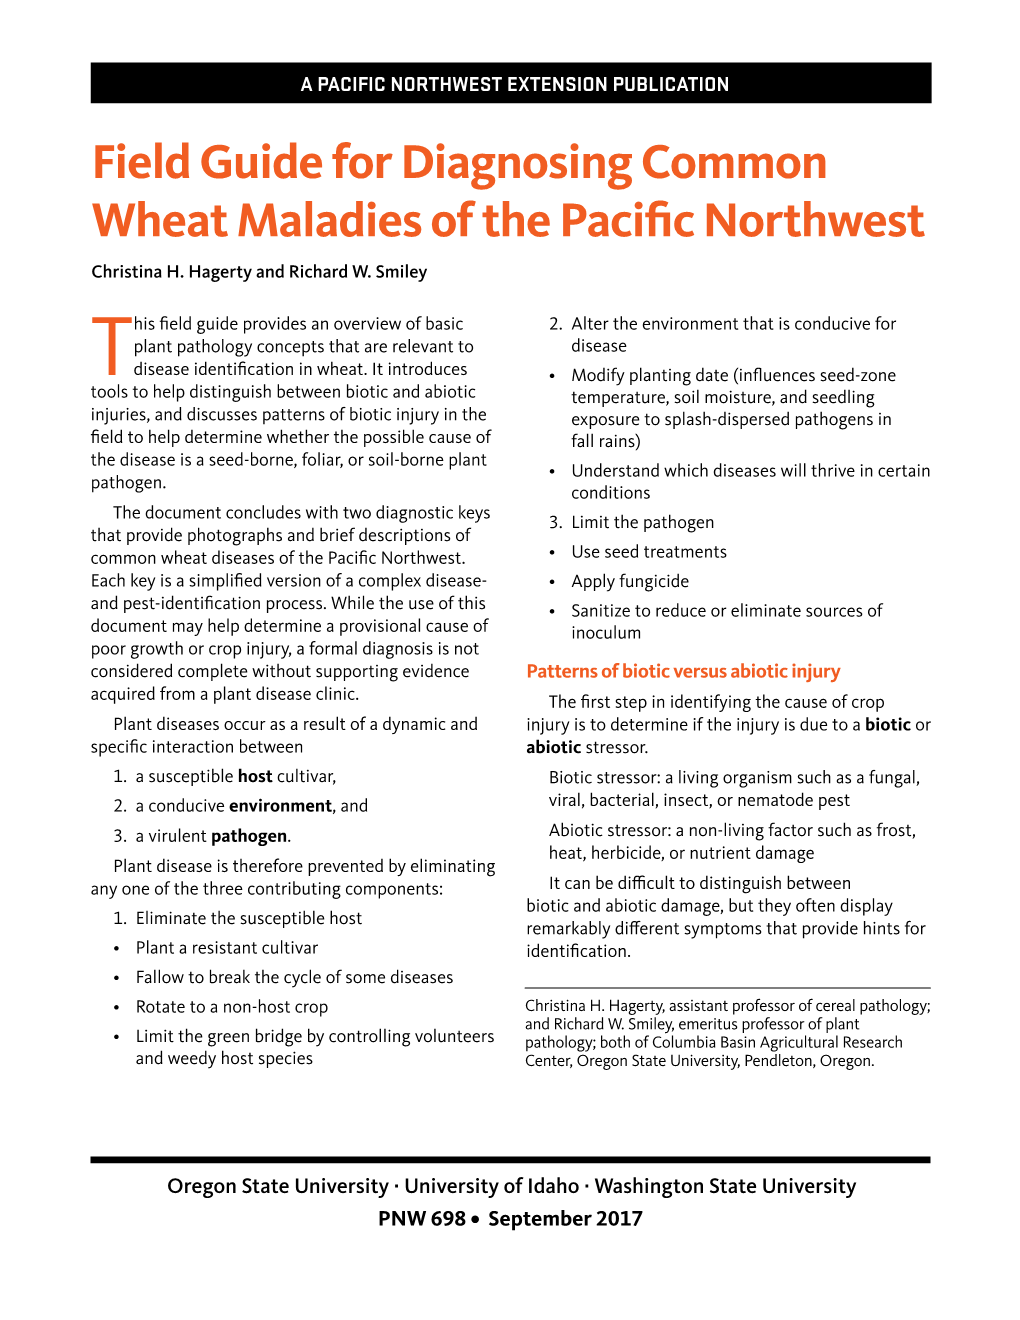 Field Guide for Diagnosing Common Wheat Maladies of the Pacific Northwest Christina H